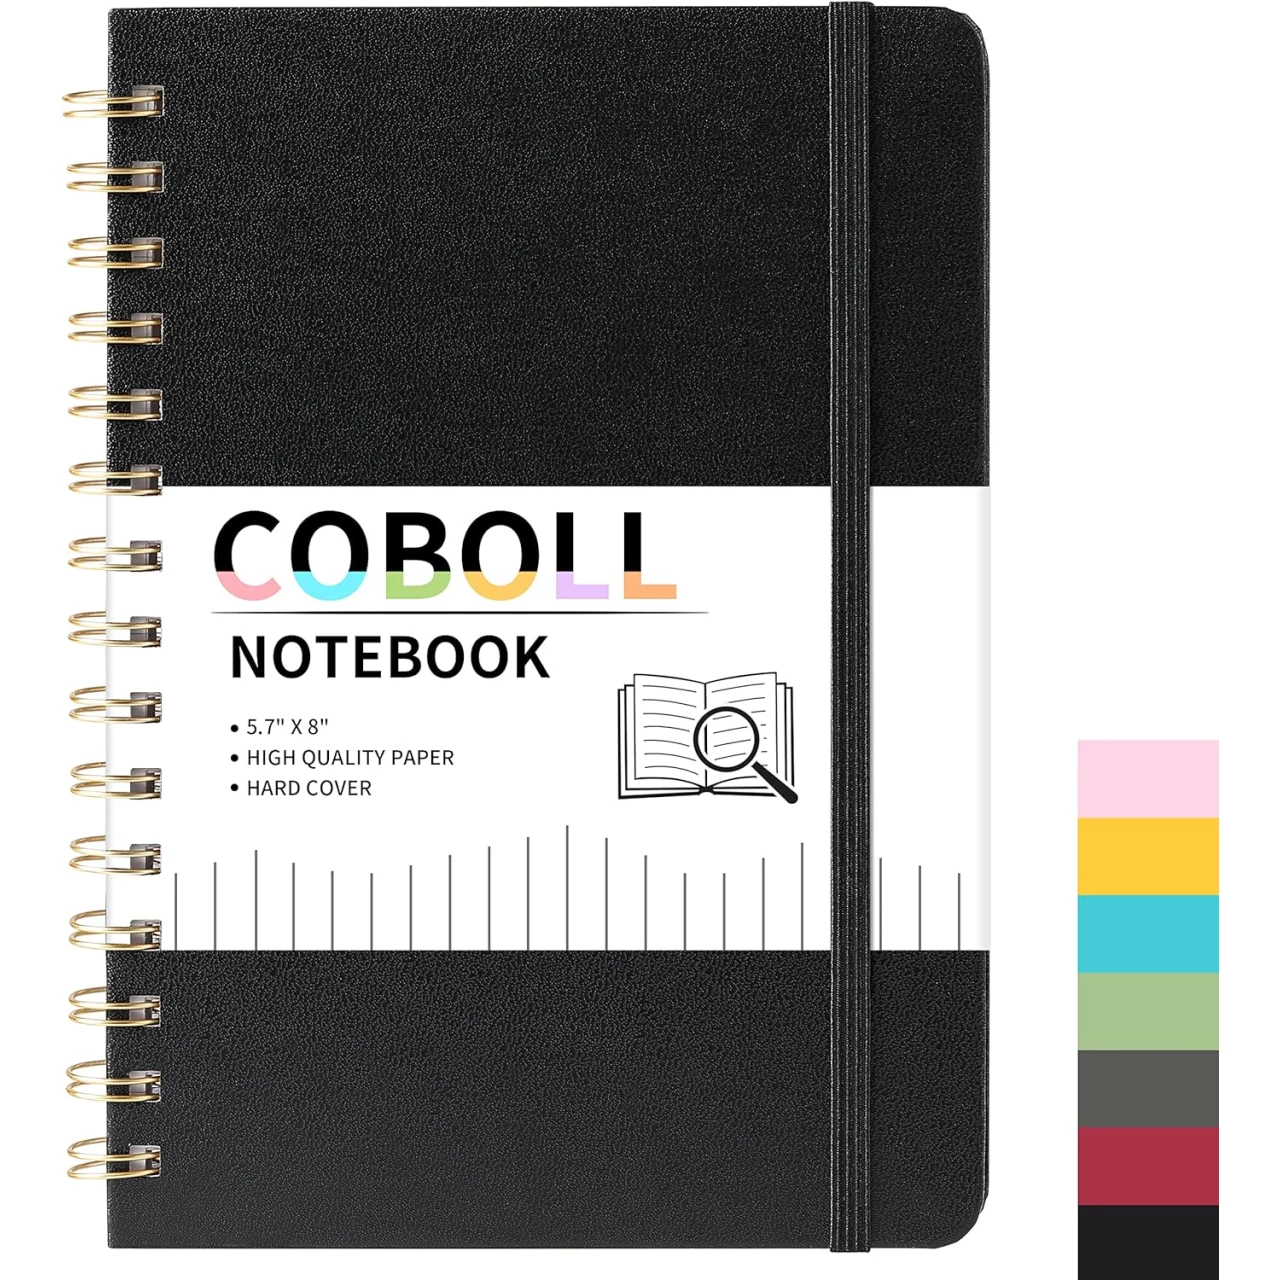 Ruled Notebook/Journal - Notebooks with Hardcover and Premium Thick Paper, 8&quot; x 5.7&quot; (exclusive of spirals), College Ruled Spiral Notebook/Journal, Strong Twin-Wire Binding, Back Pocket, Black